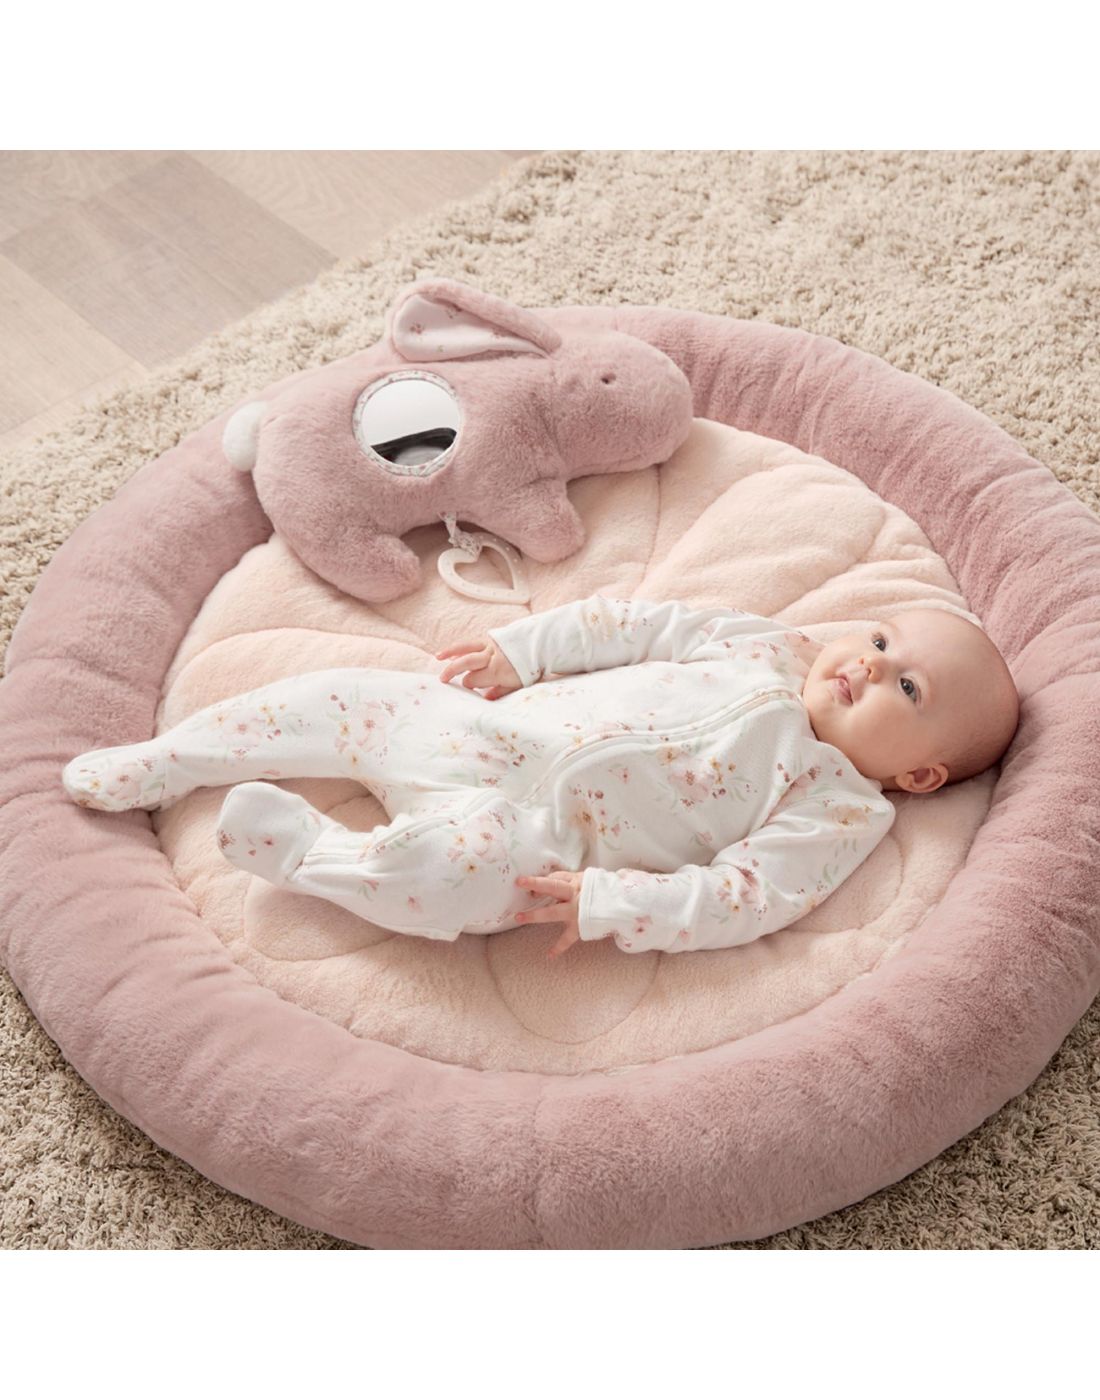 Mamas & Papas Welcome to the World Bunny Playmat Pink